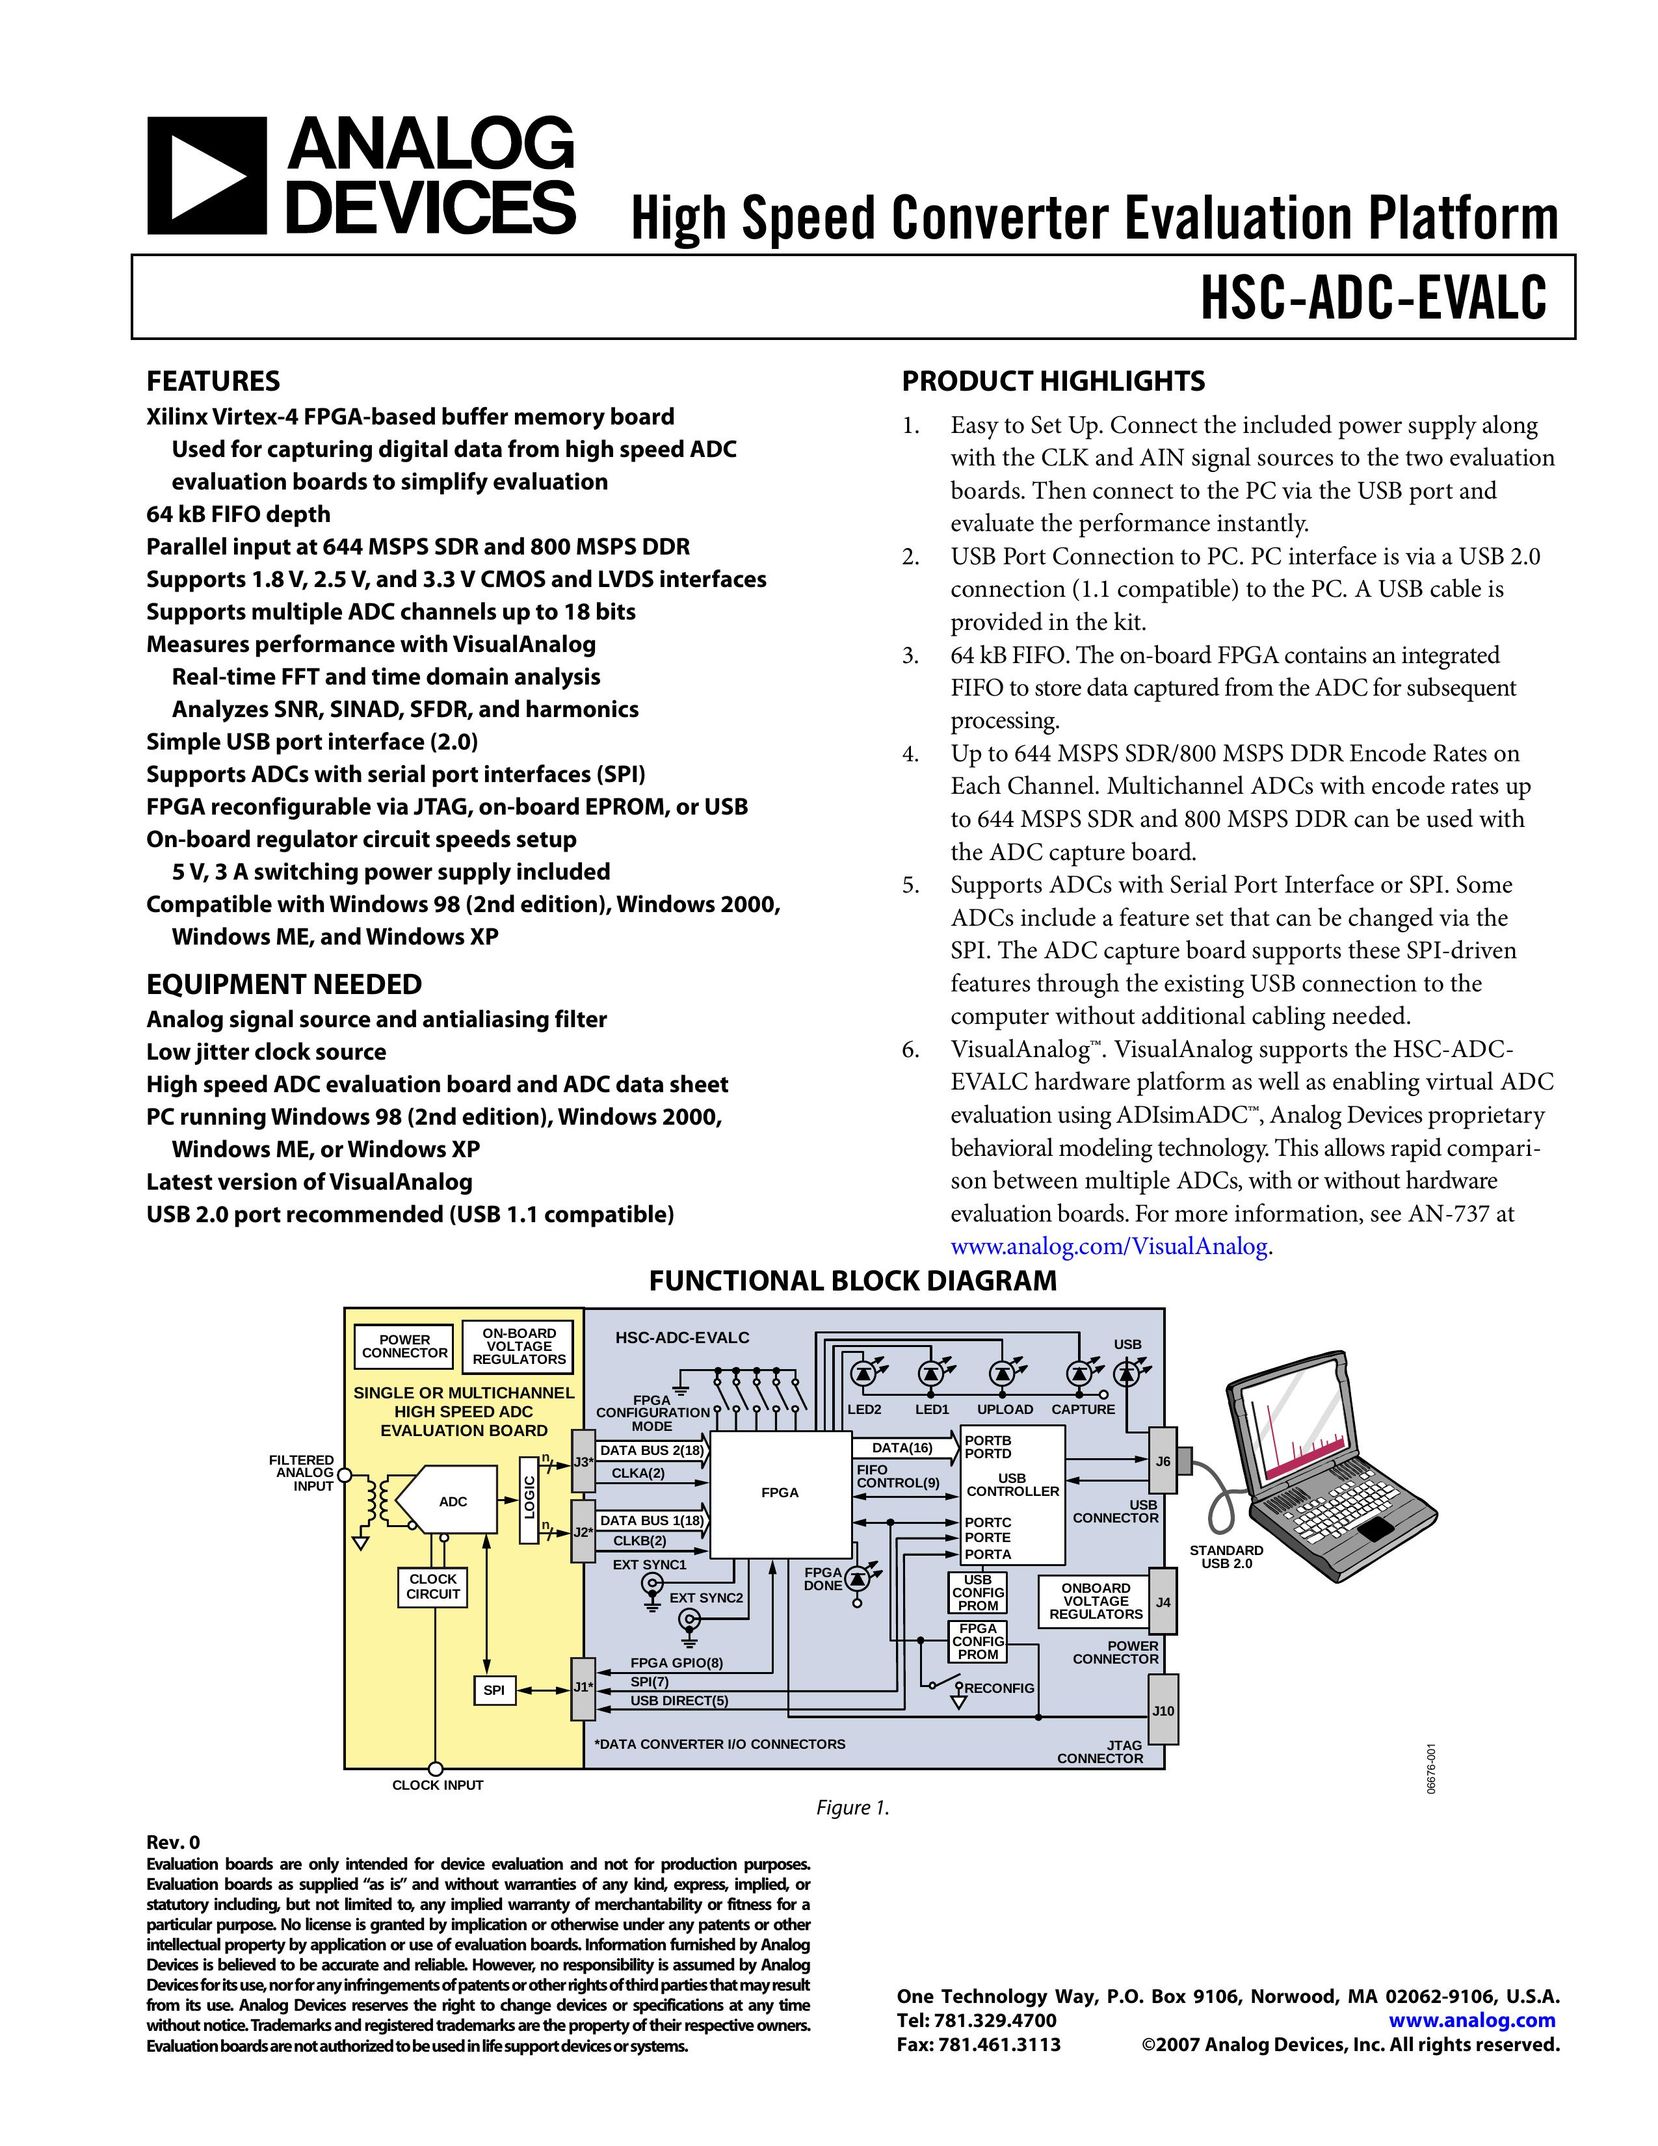 Analog Devices HSC-ADC-EVALC TV Converter Box User Manual (Page 1)